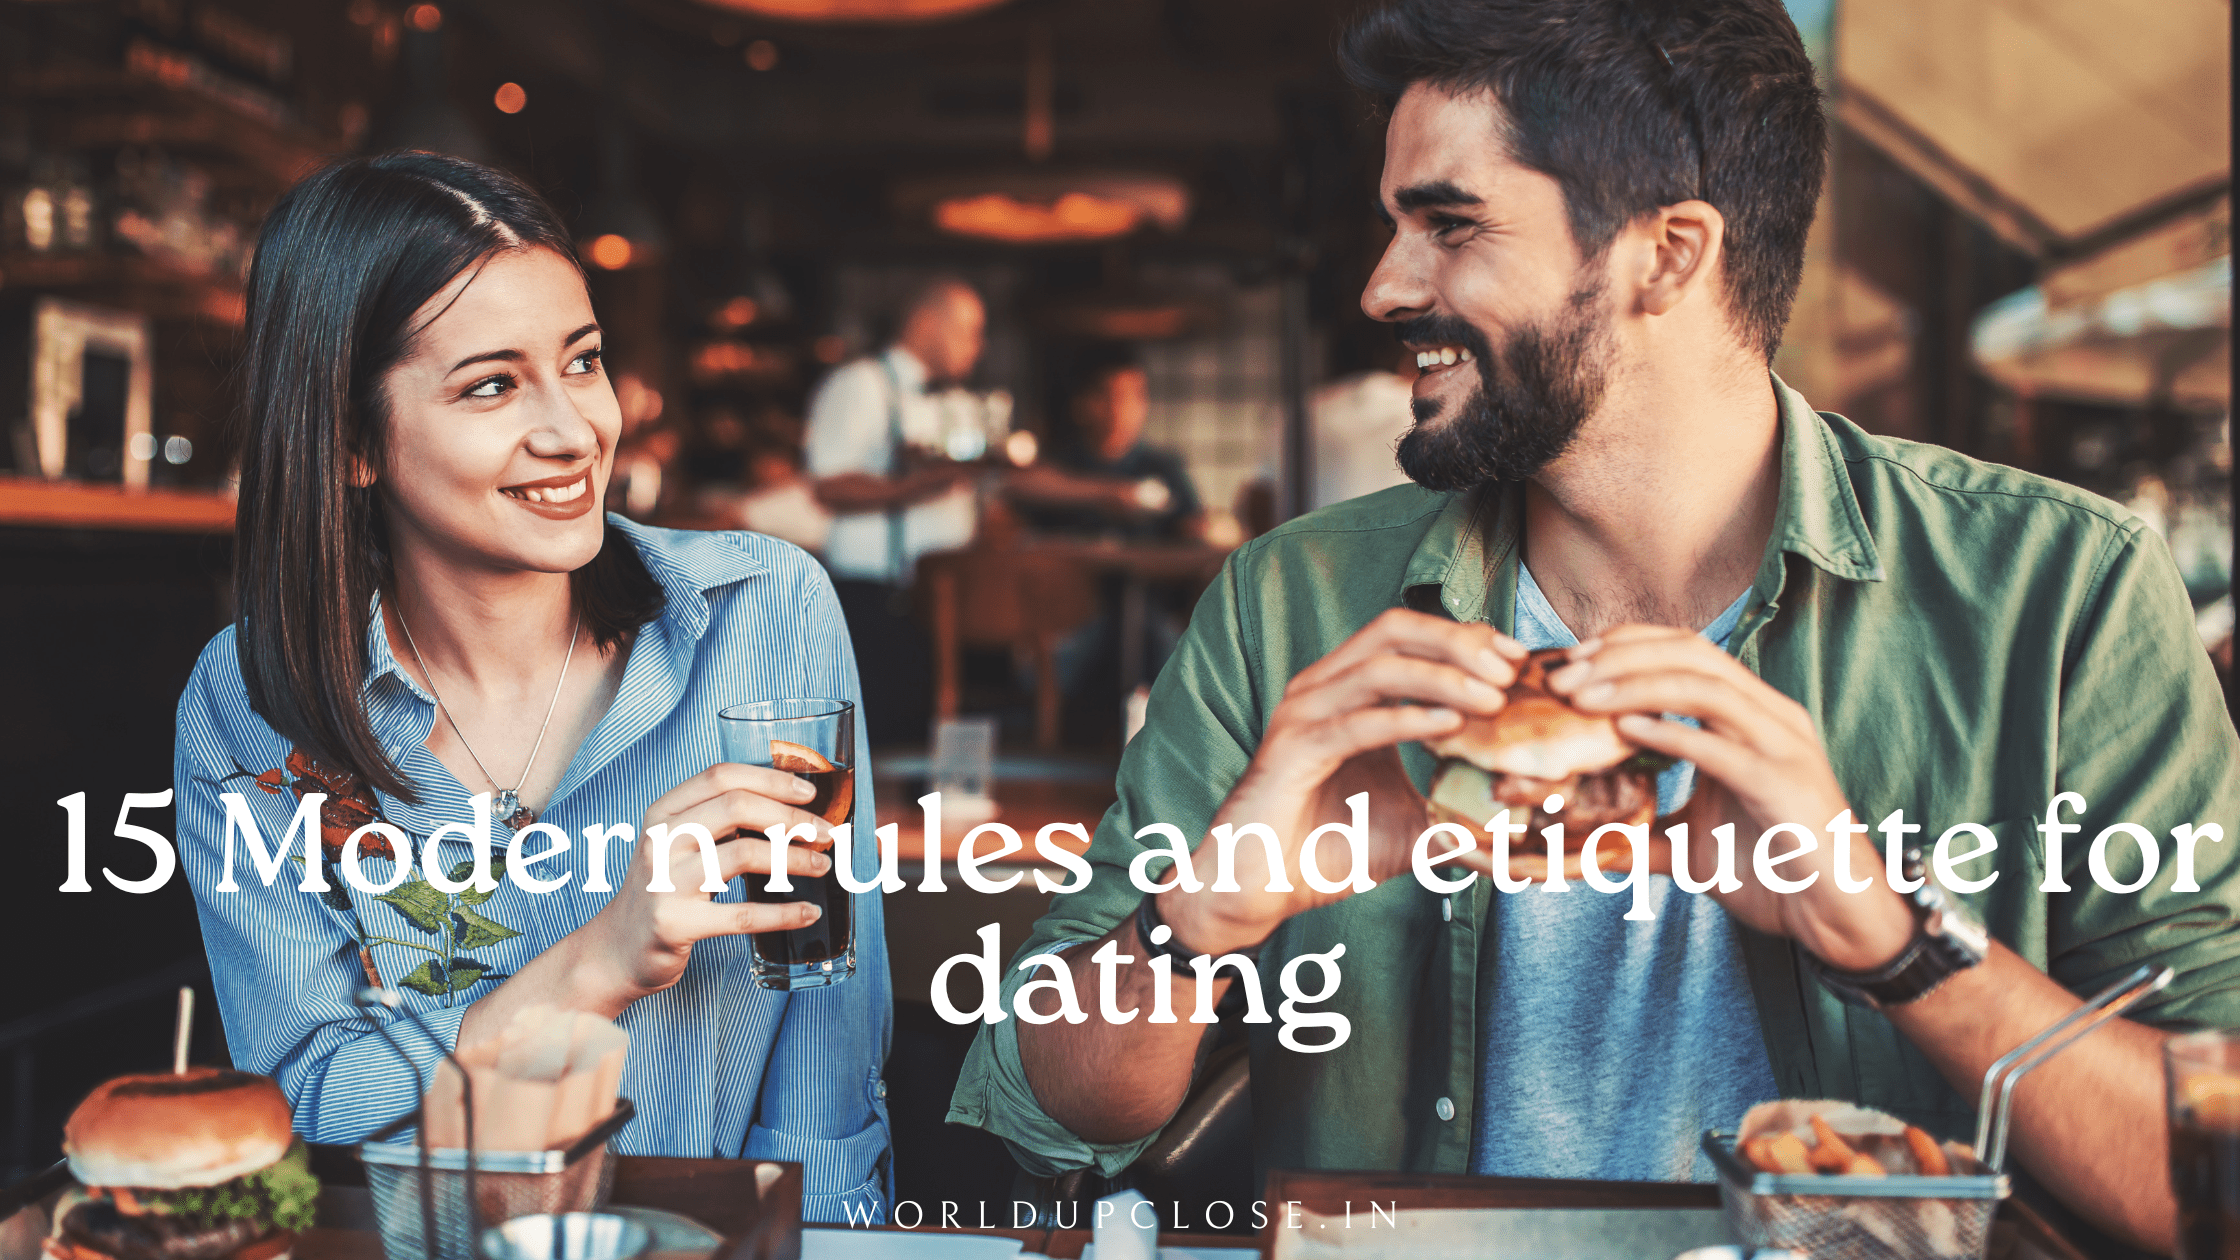 15 Modern rules and etiquette for dating 4